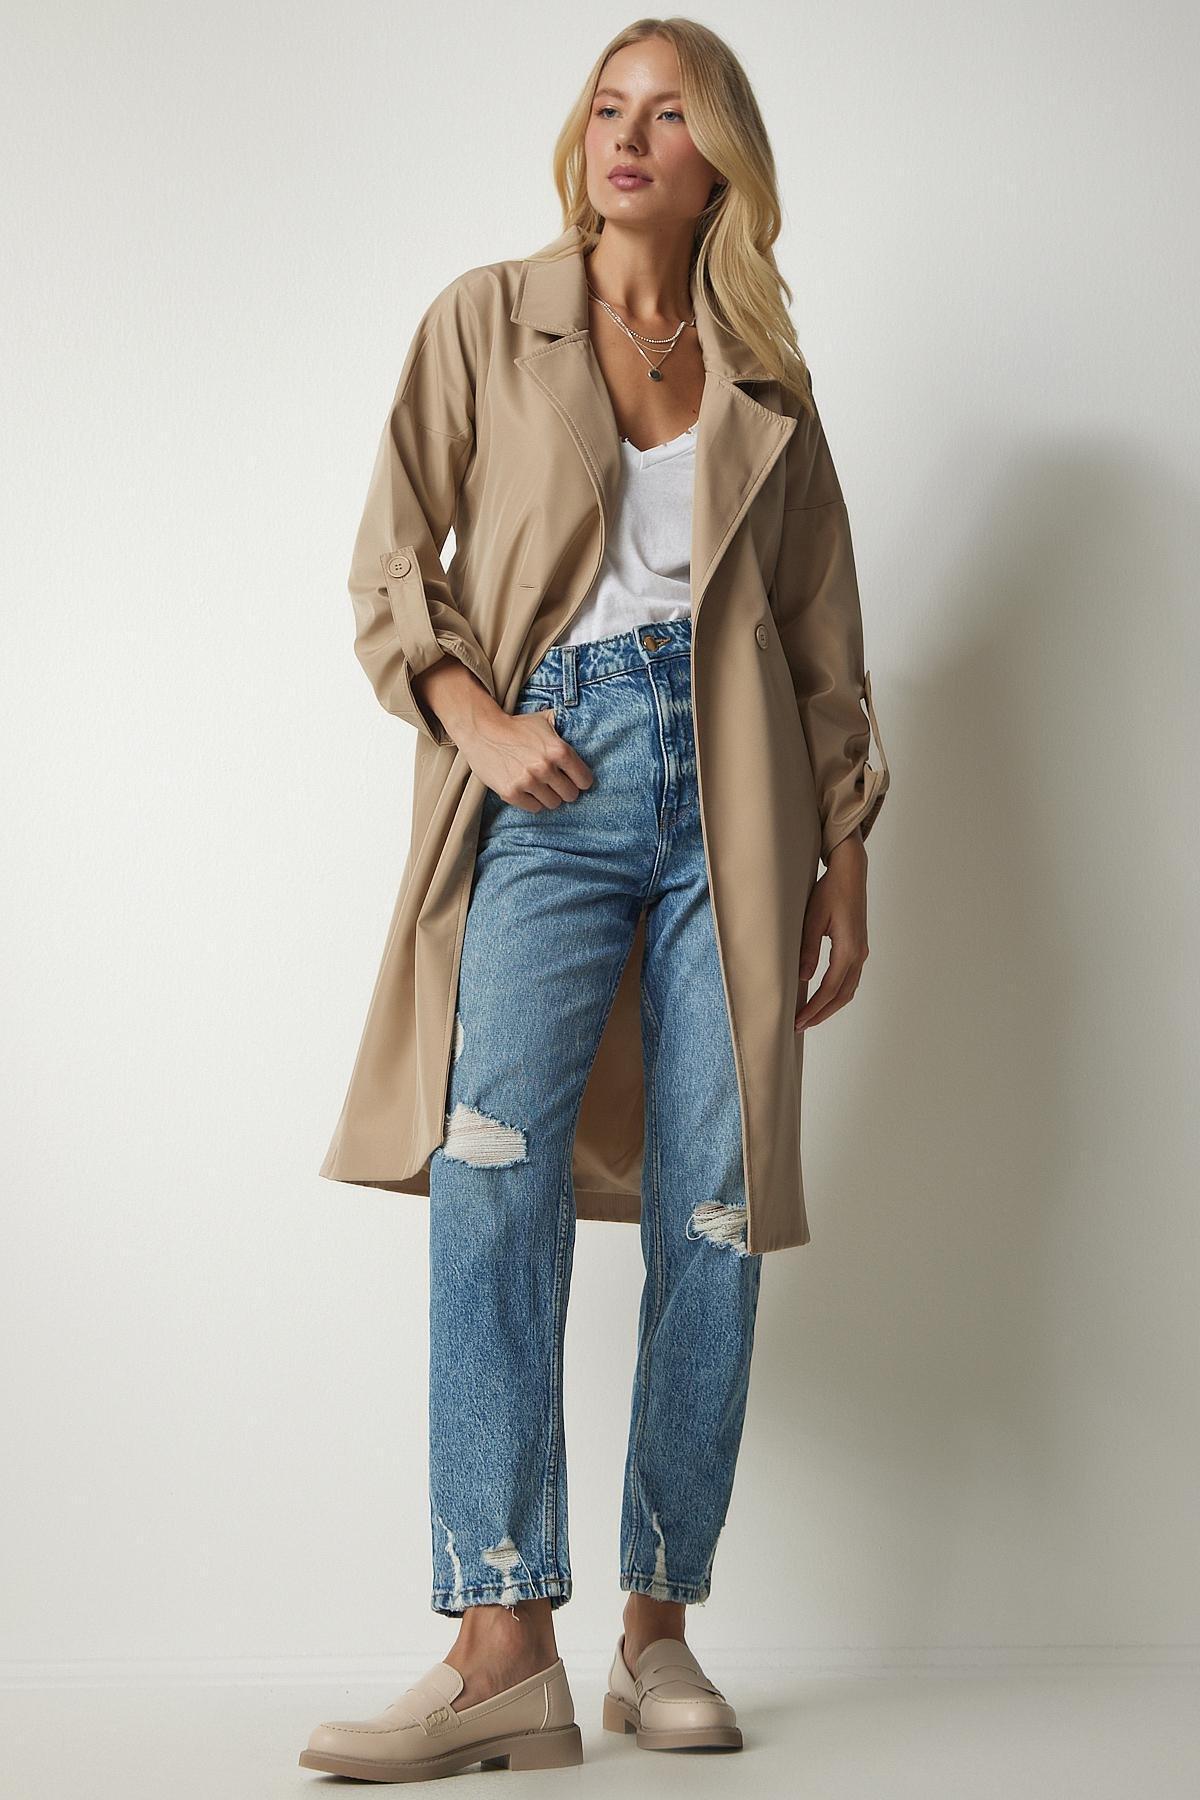 Happiness Istanbul - Beige Belted Seasonal Trench Coat